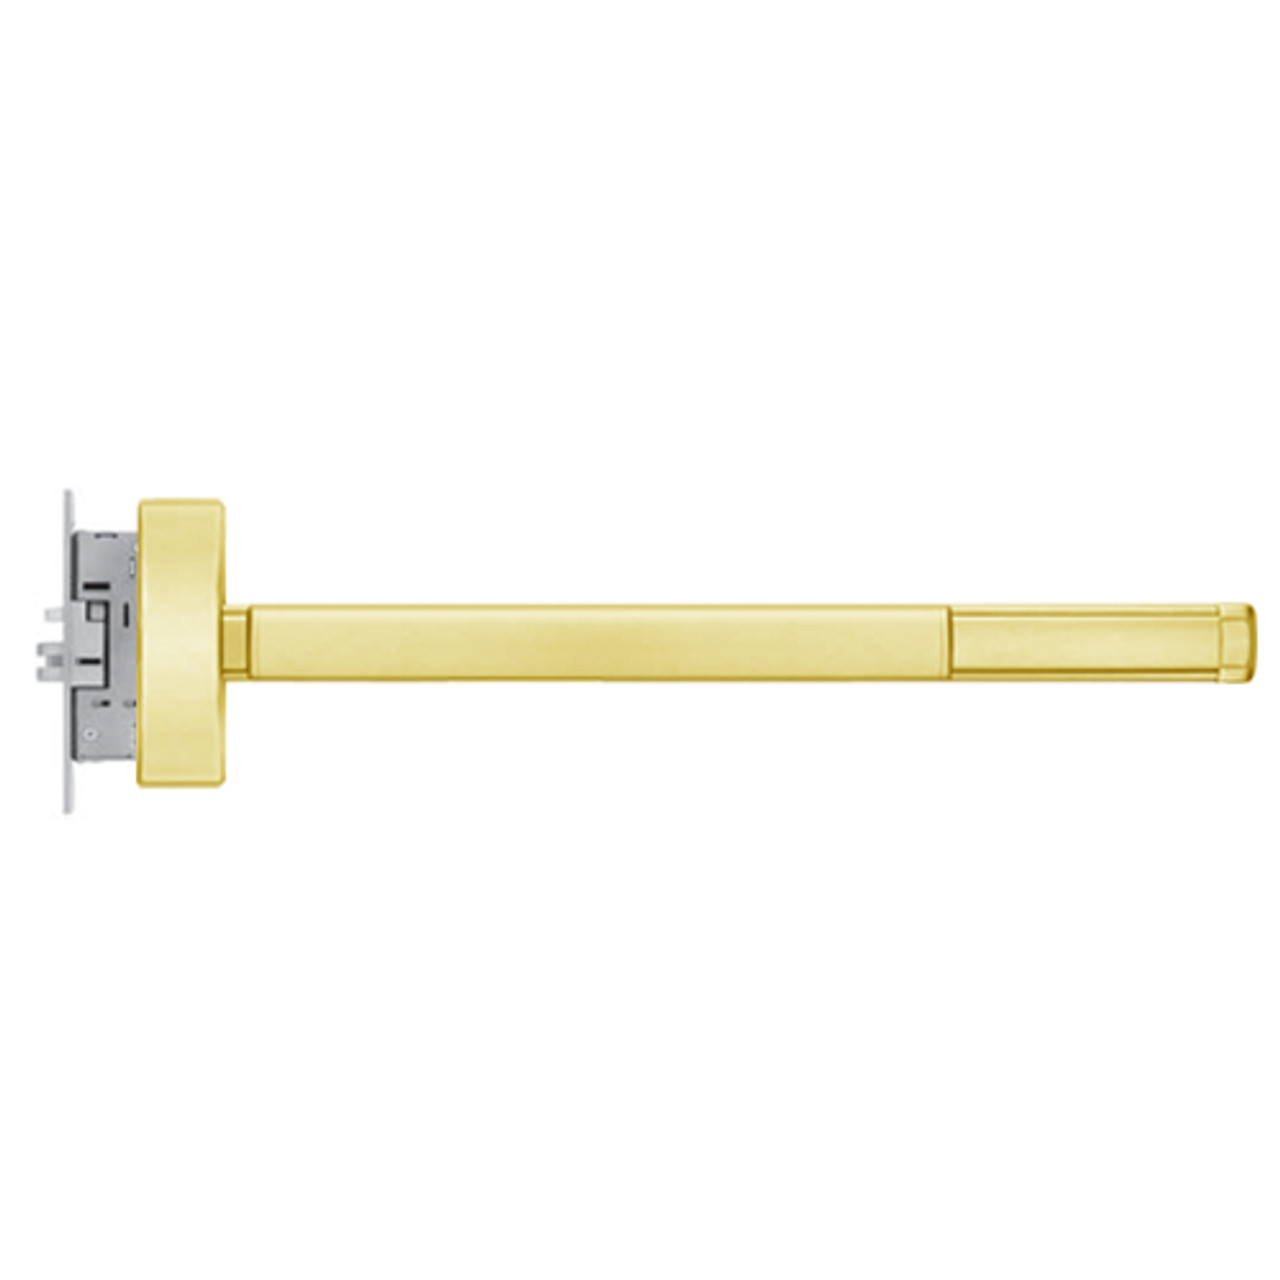 MLRFL2315-LHR-605-48 PHI 2300 Series Fire Rated Apex Mortise Exit Device with Motorized Latch Retraction Prepped for Thumb Piece Always Active in Bright Brass Finish